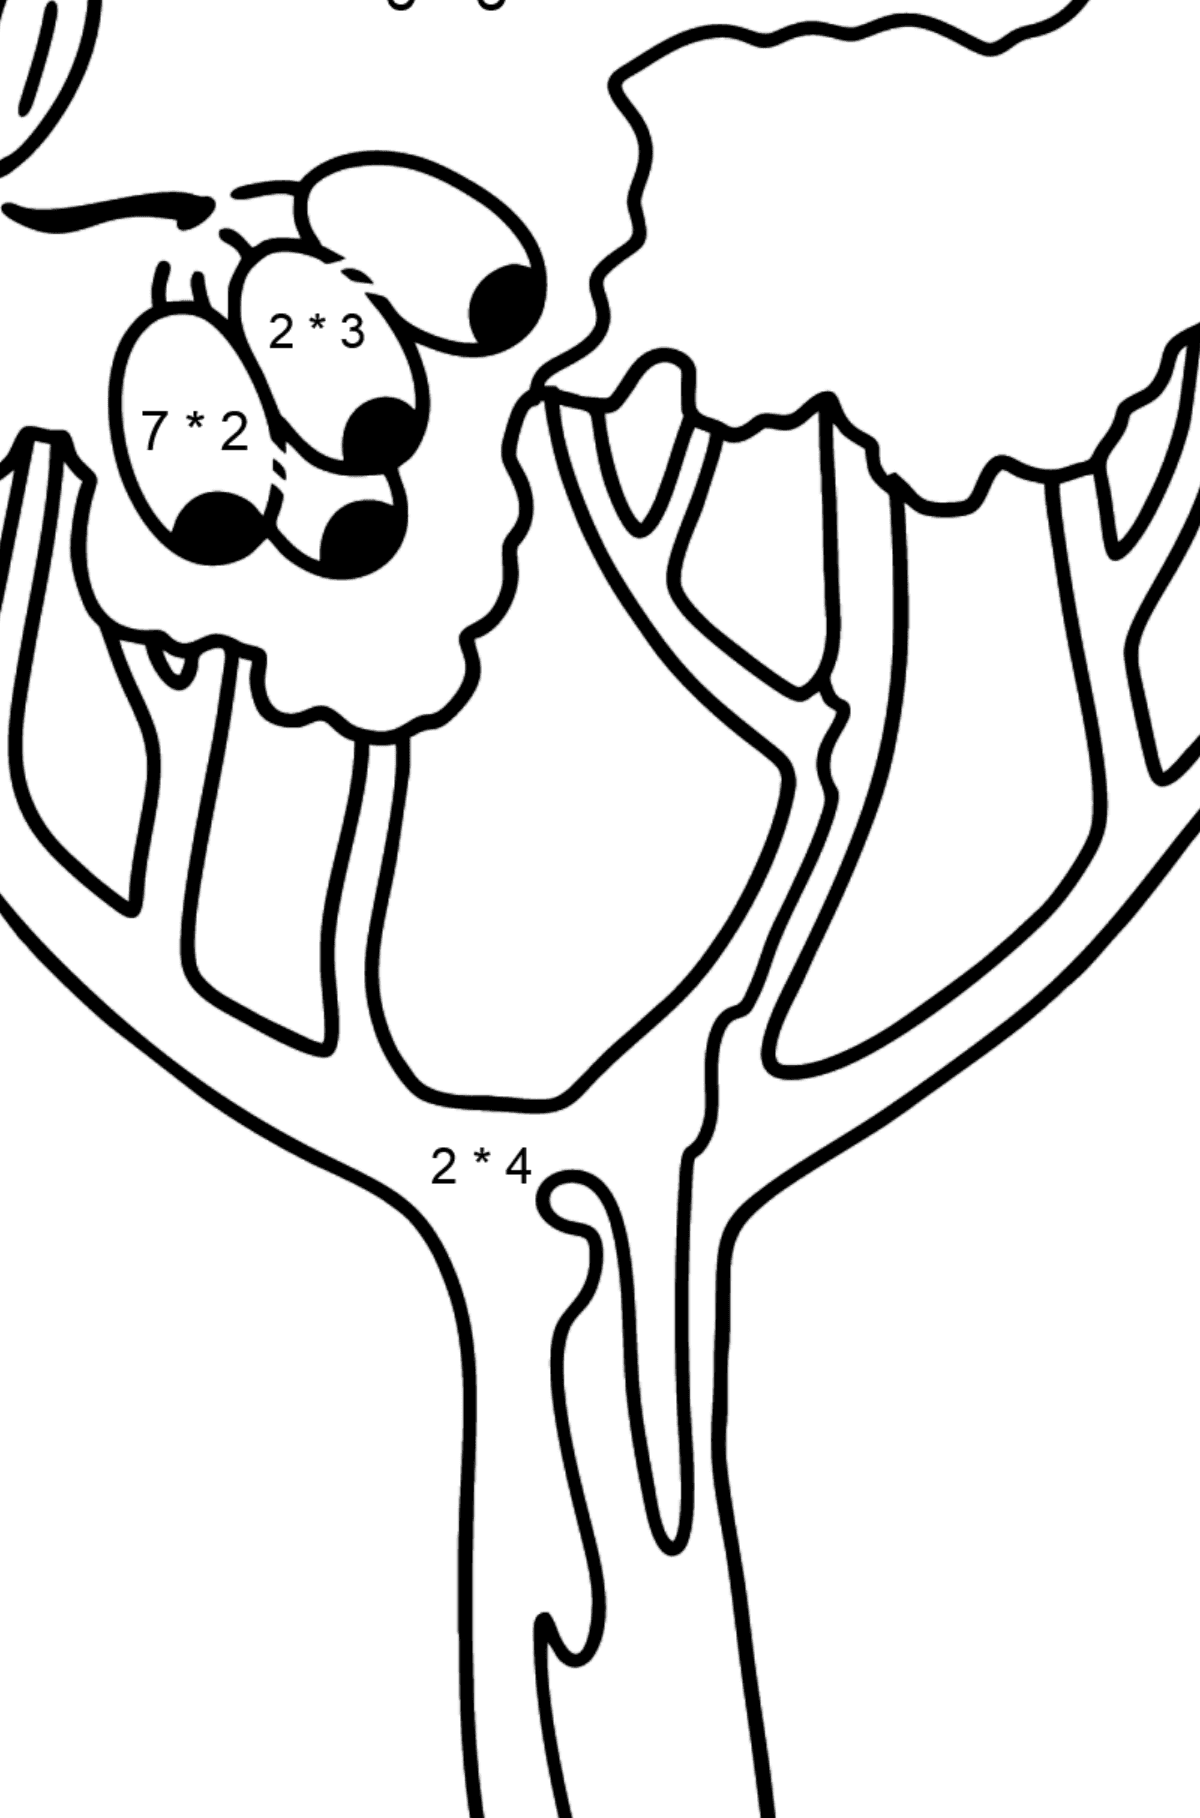 Gum tree - Corimbia coloring page - Math Coloring - Multiplication for Kids